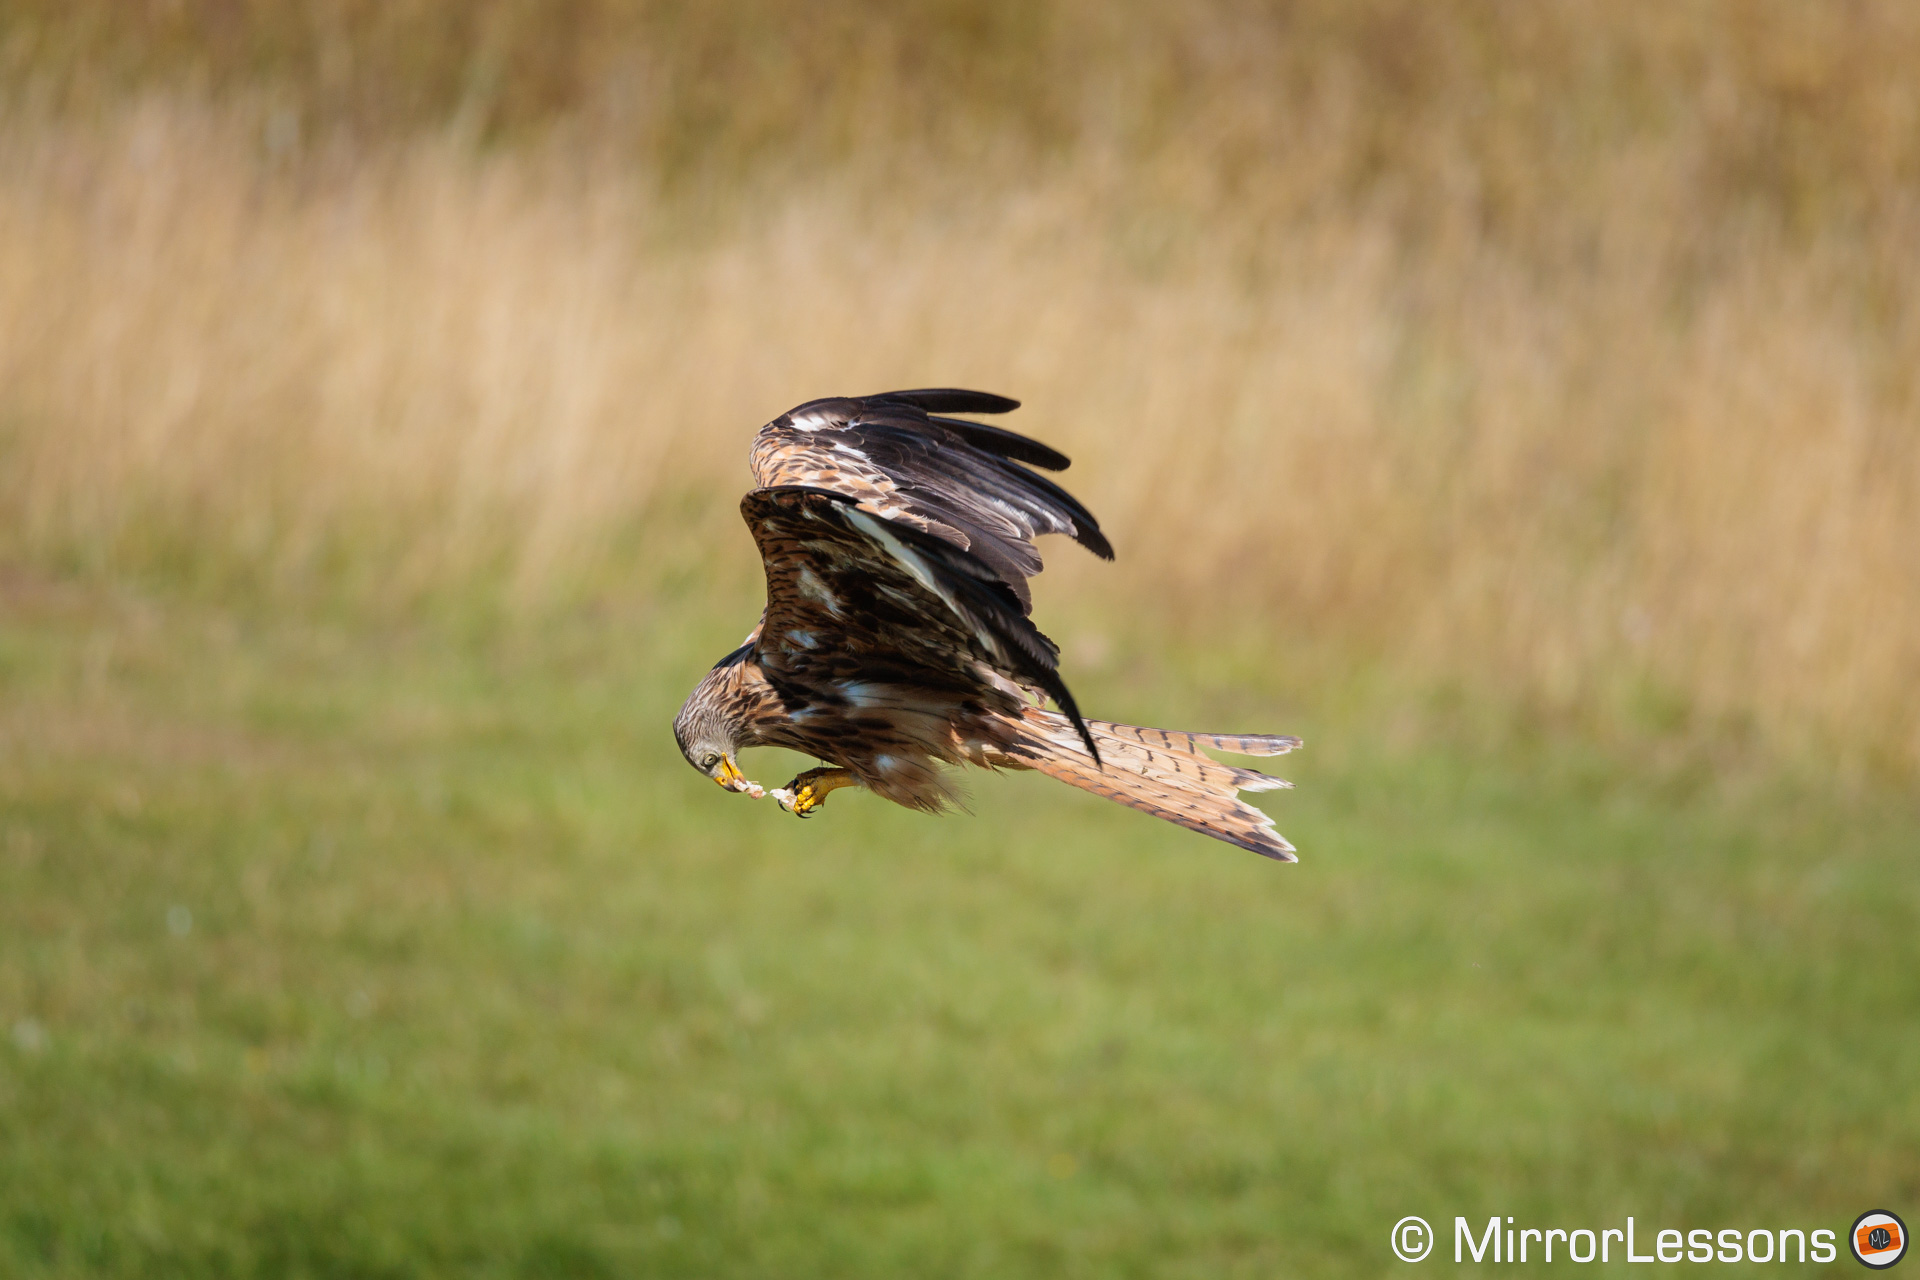 Red kite flying with green grass in the background, eating a piece of meat.